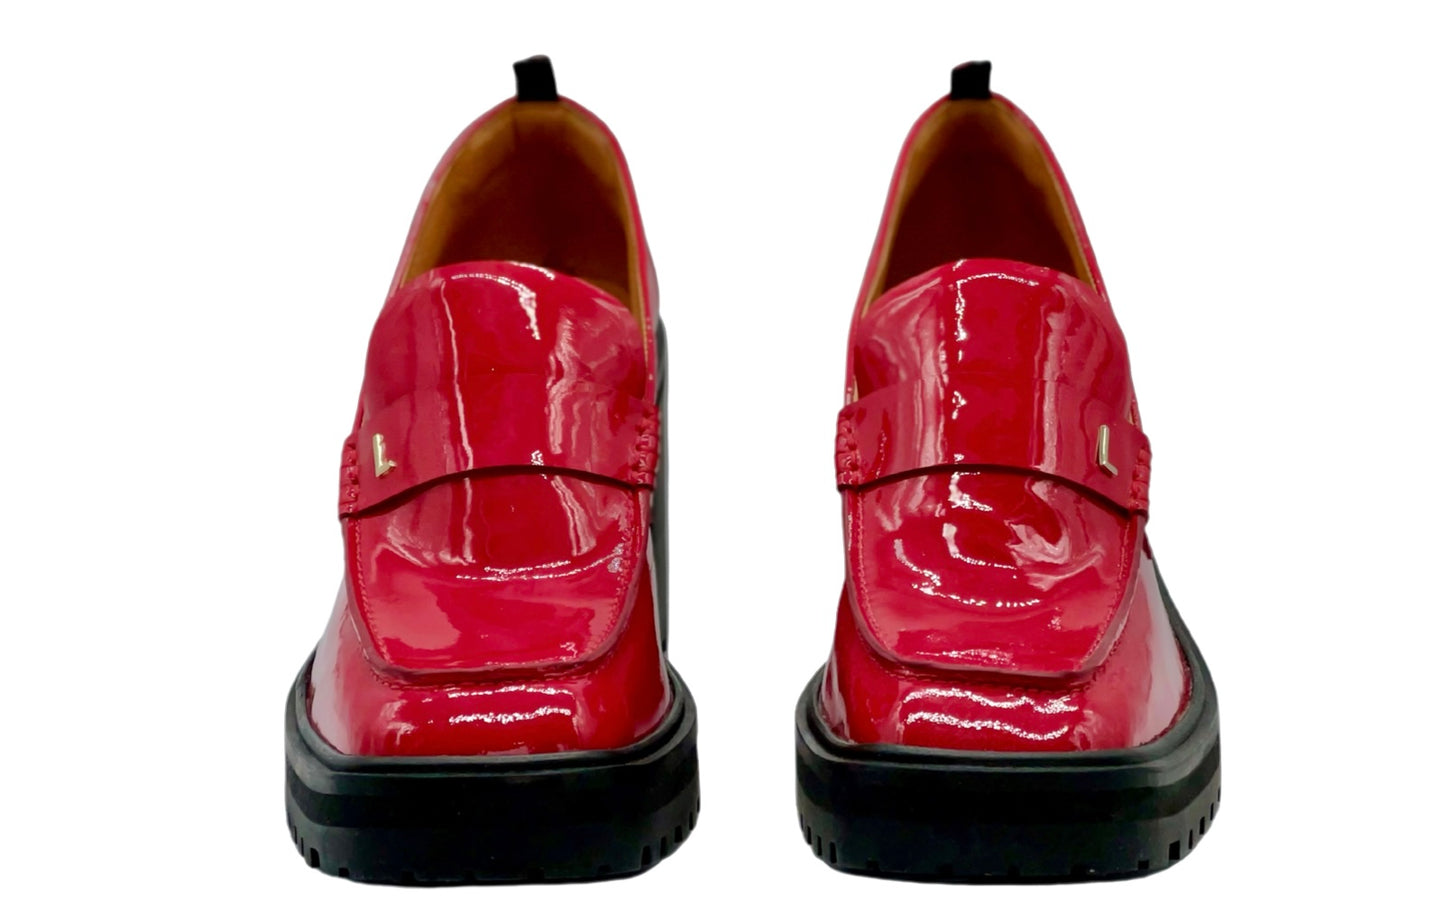 dr LIZA loafer pump - RUBY RED PATENT